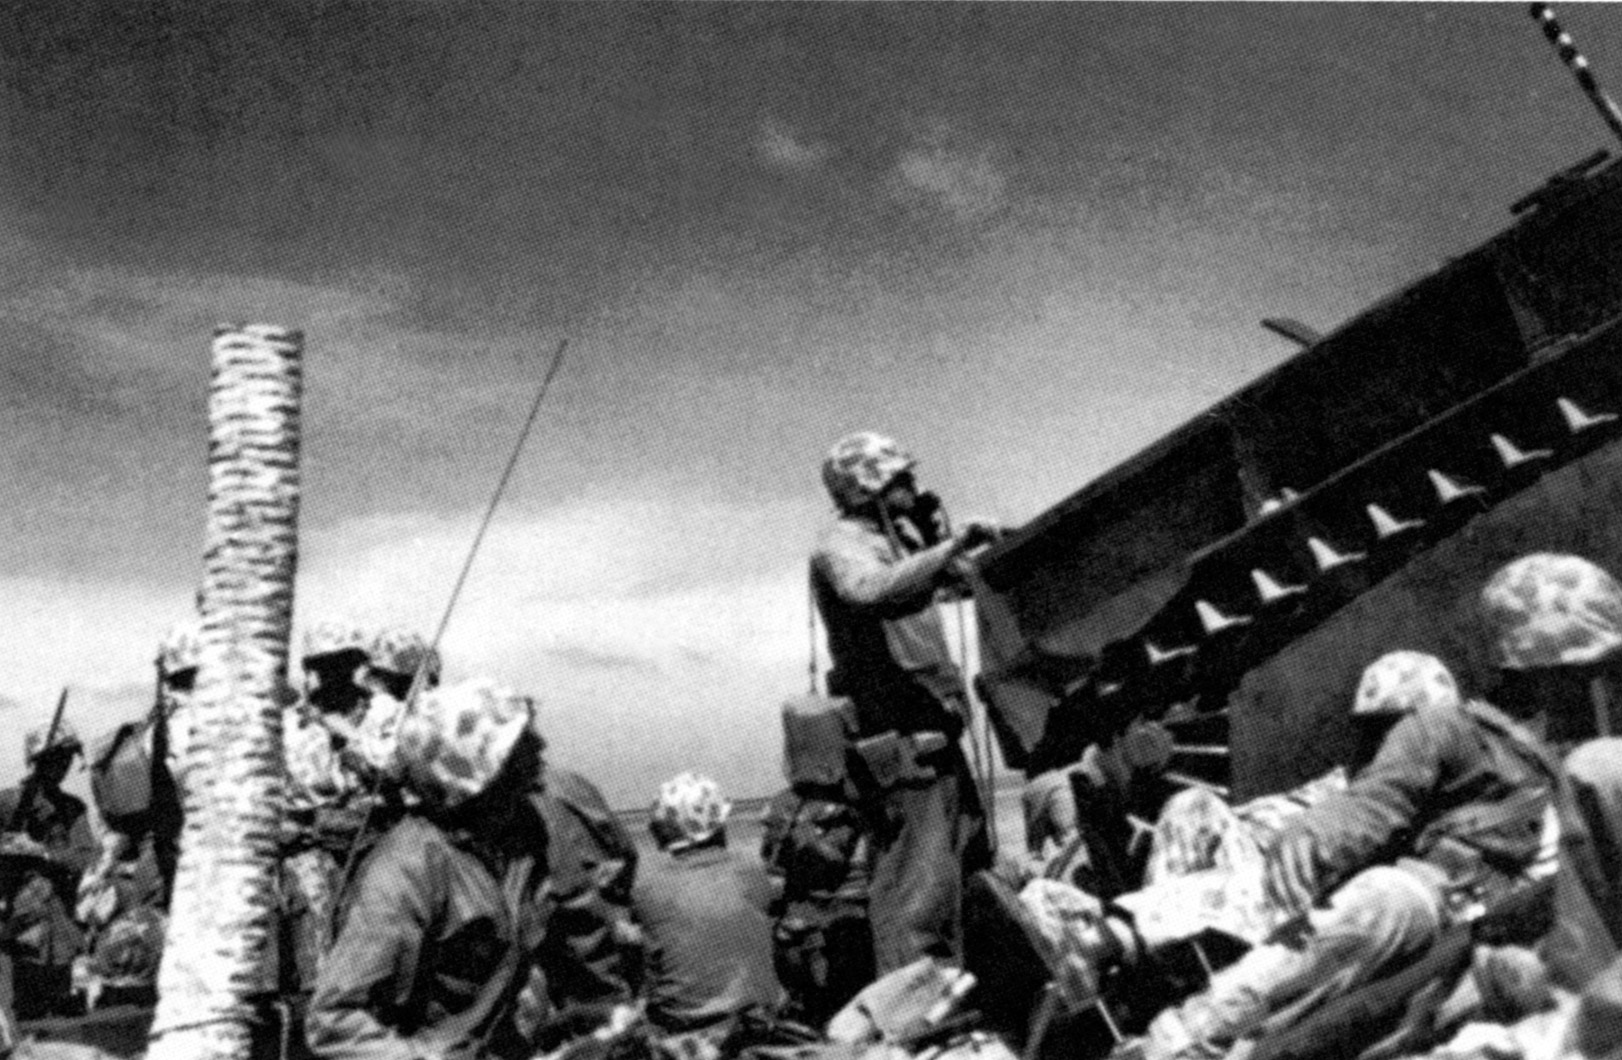 Using a field telephone, Marine Major Jim Crowe shelters behind LVT-23 and directs tactical movements against Japanese positions at Tarawa.  